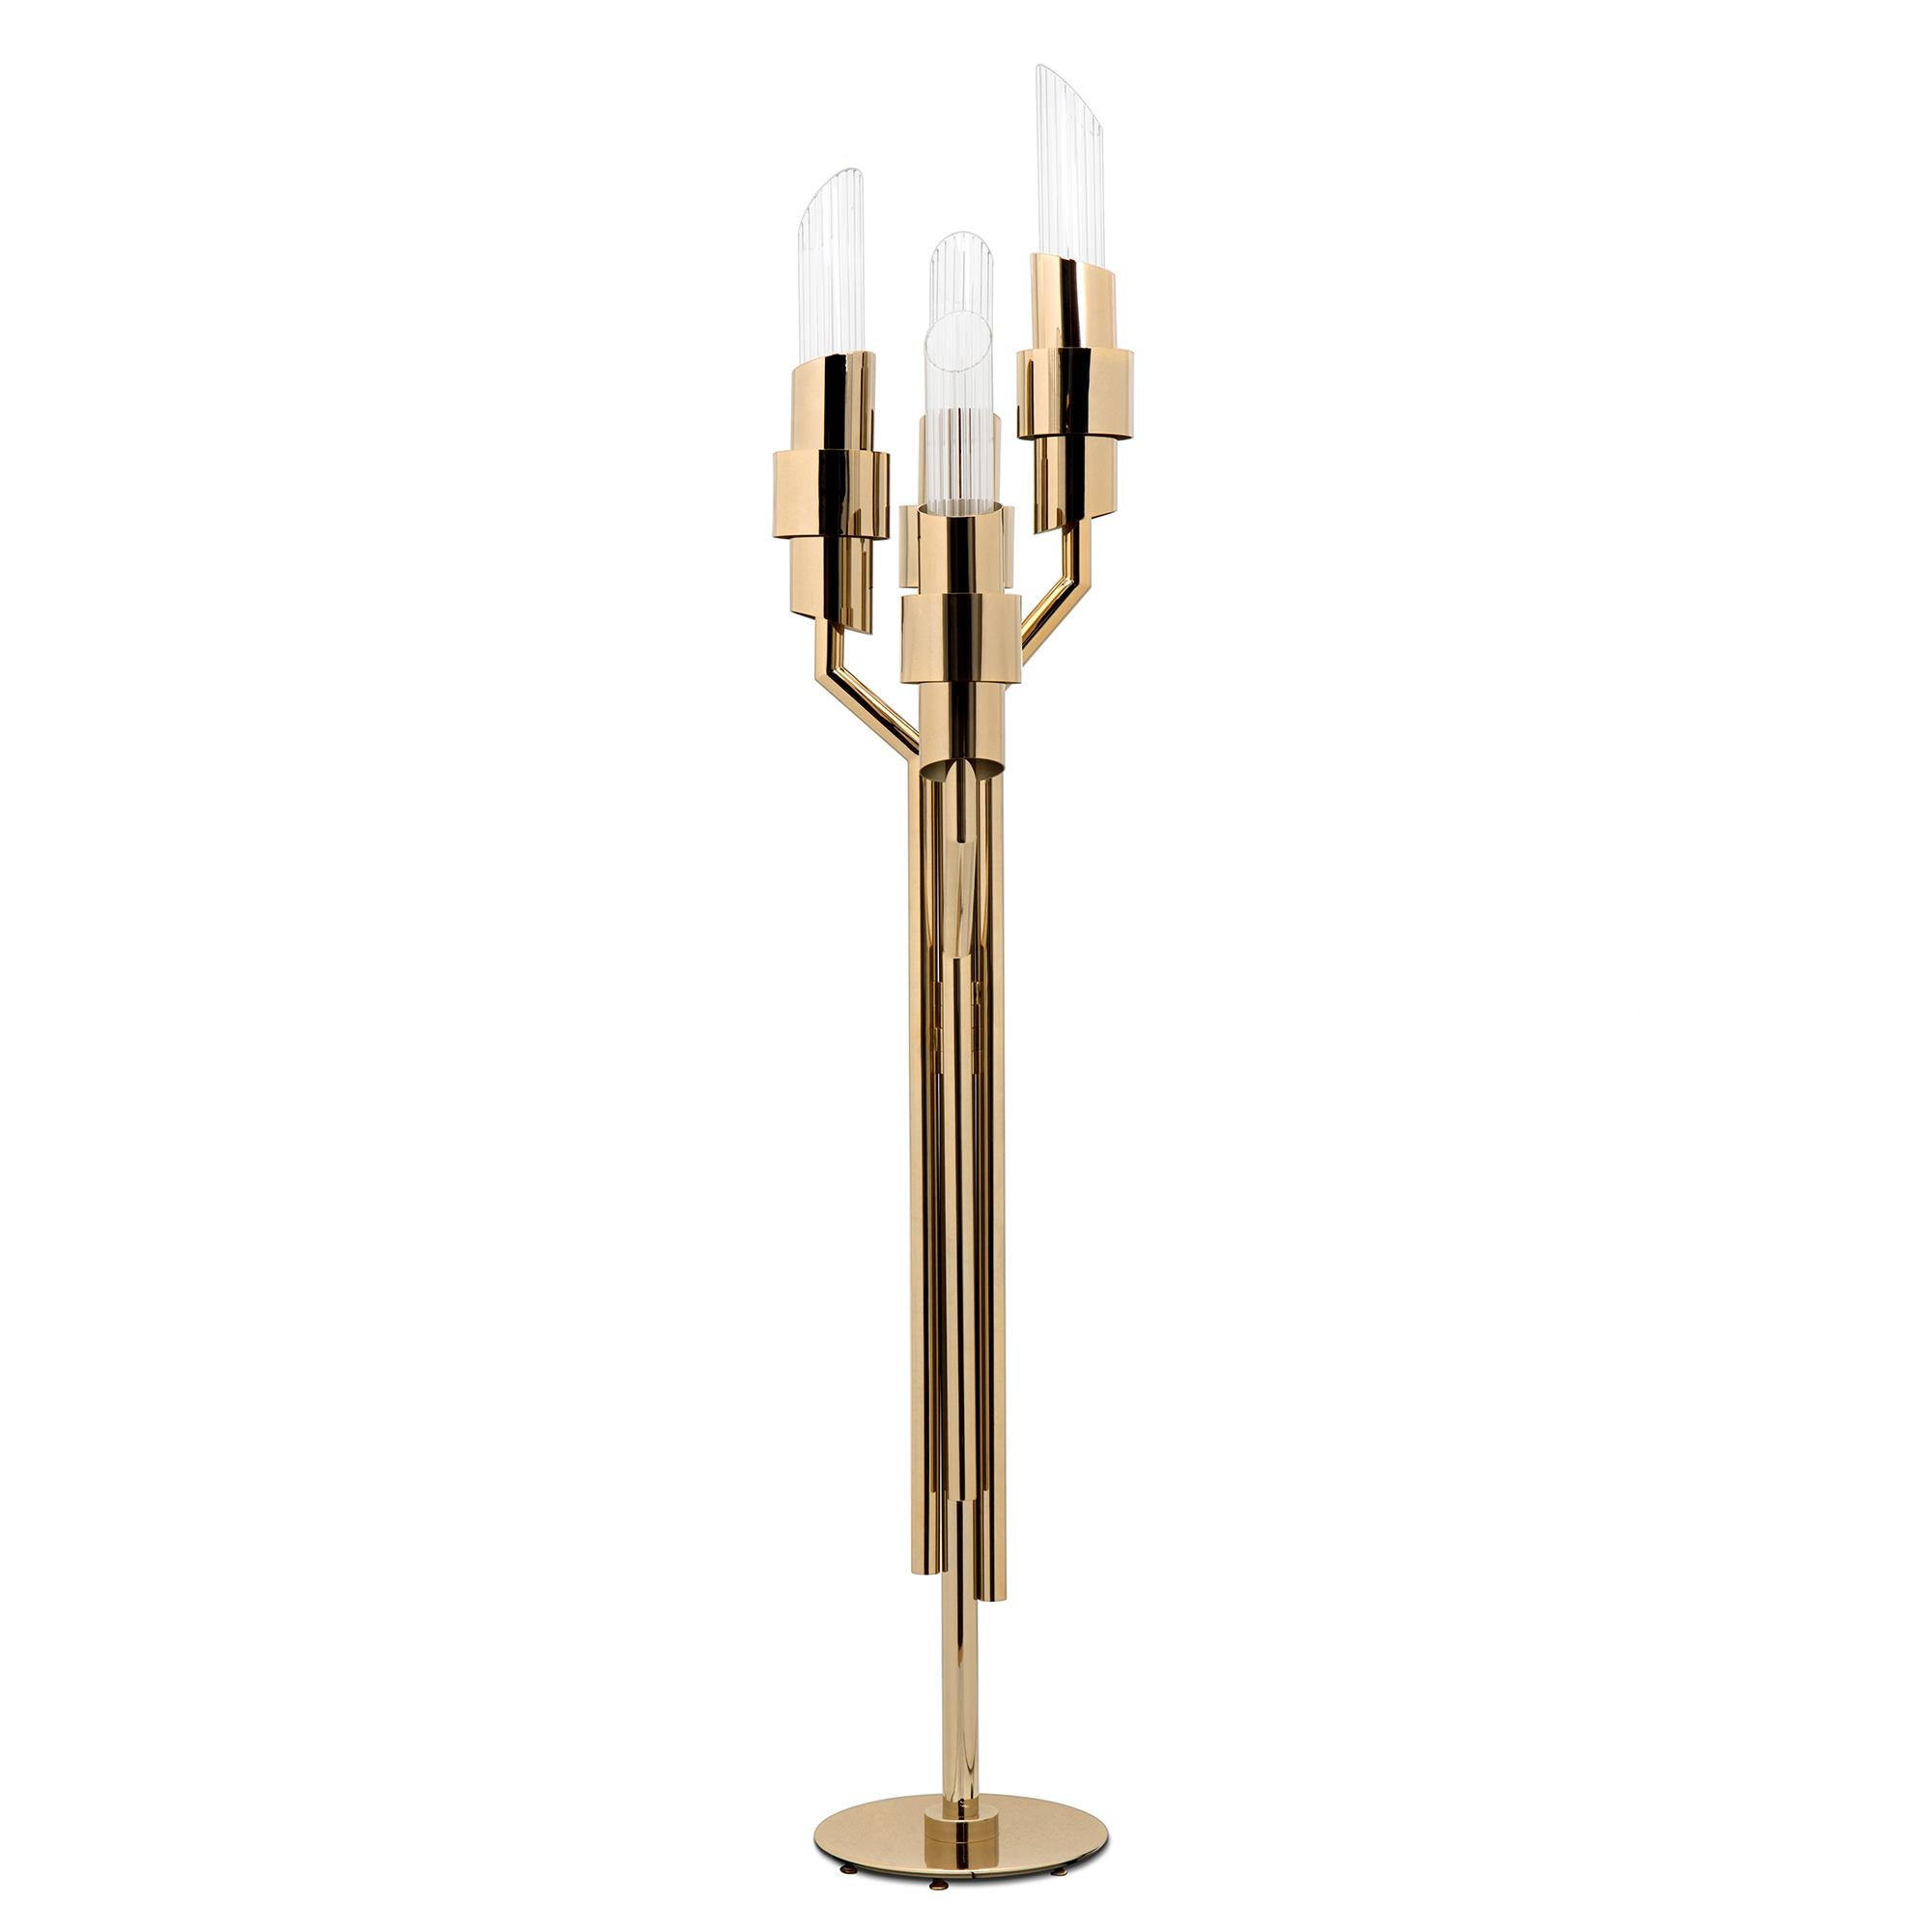 Floor lamp Vitta with structure in gold-plated
polished brass and with crystal glass lamp shades. 
With 4 bulbs, lamp holder type G9, halogen bulb, 
max 40watts. Voltage 220-240V. Bulbs not included.
 